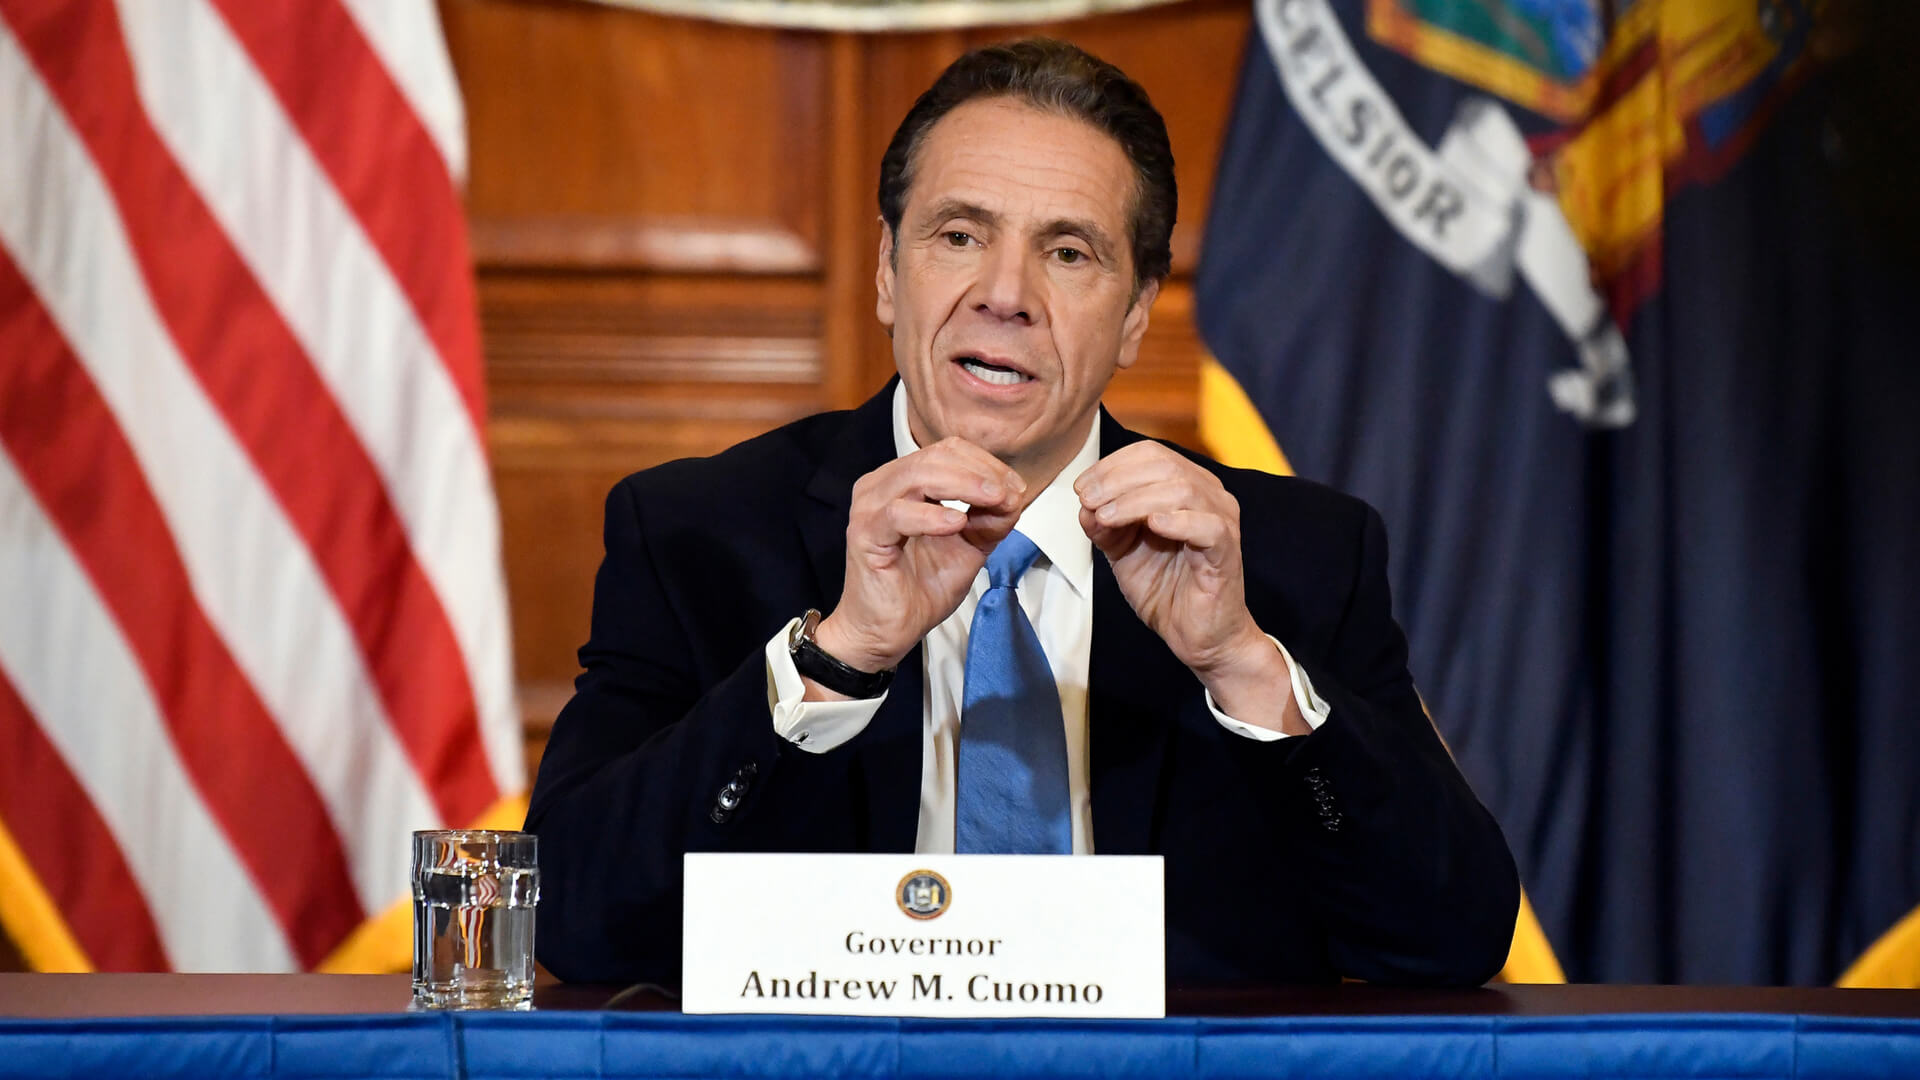 Andrew Cuomo announcing efforts to prevent the spread of coronavirus